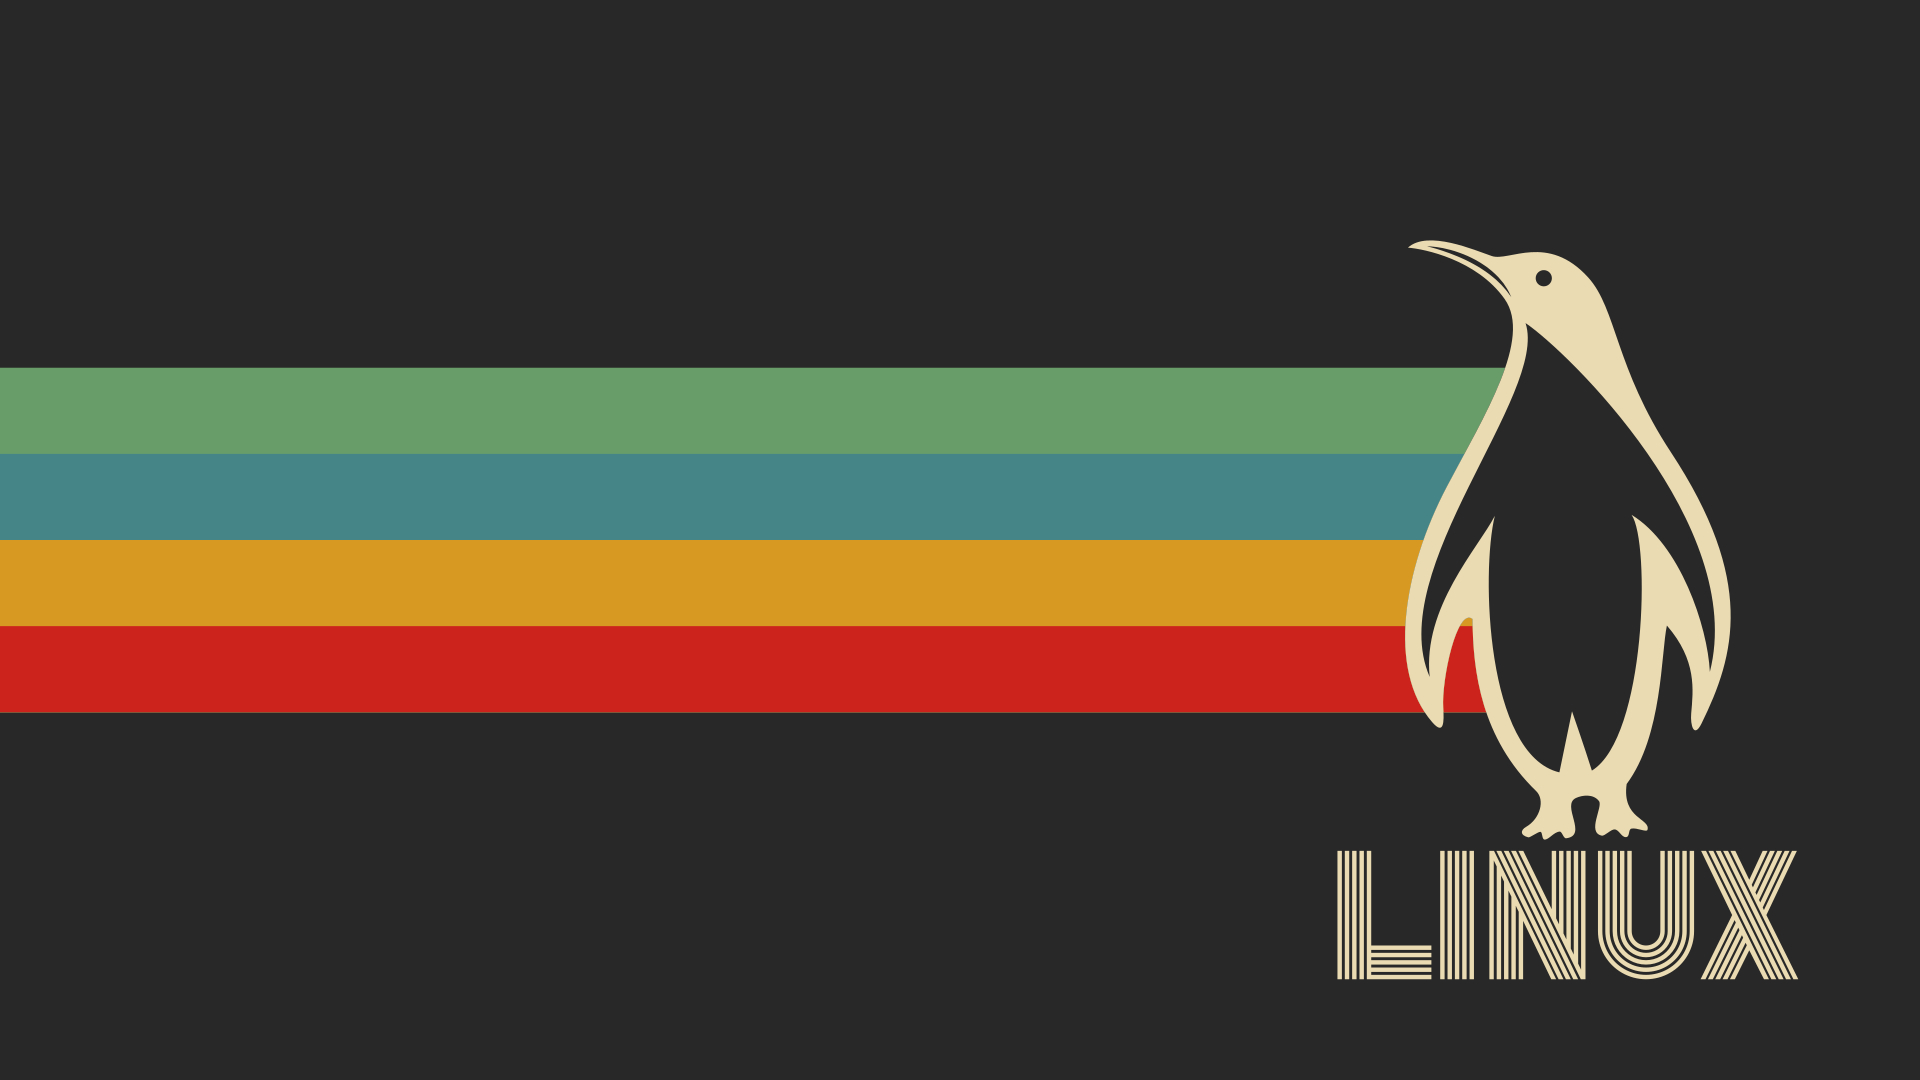 Linux Retro Wallpaper Hd Artist 4k Wallpapers Images Photos And Background Wallpapers Den